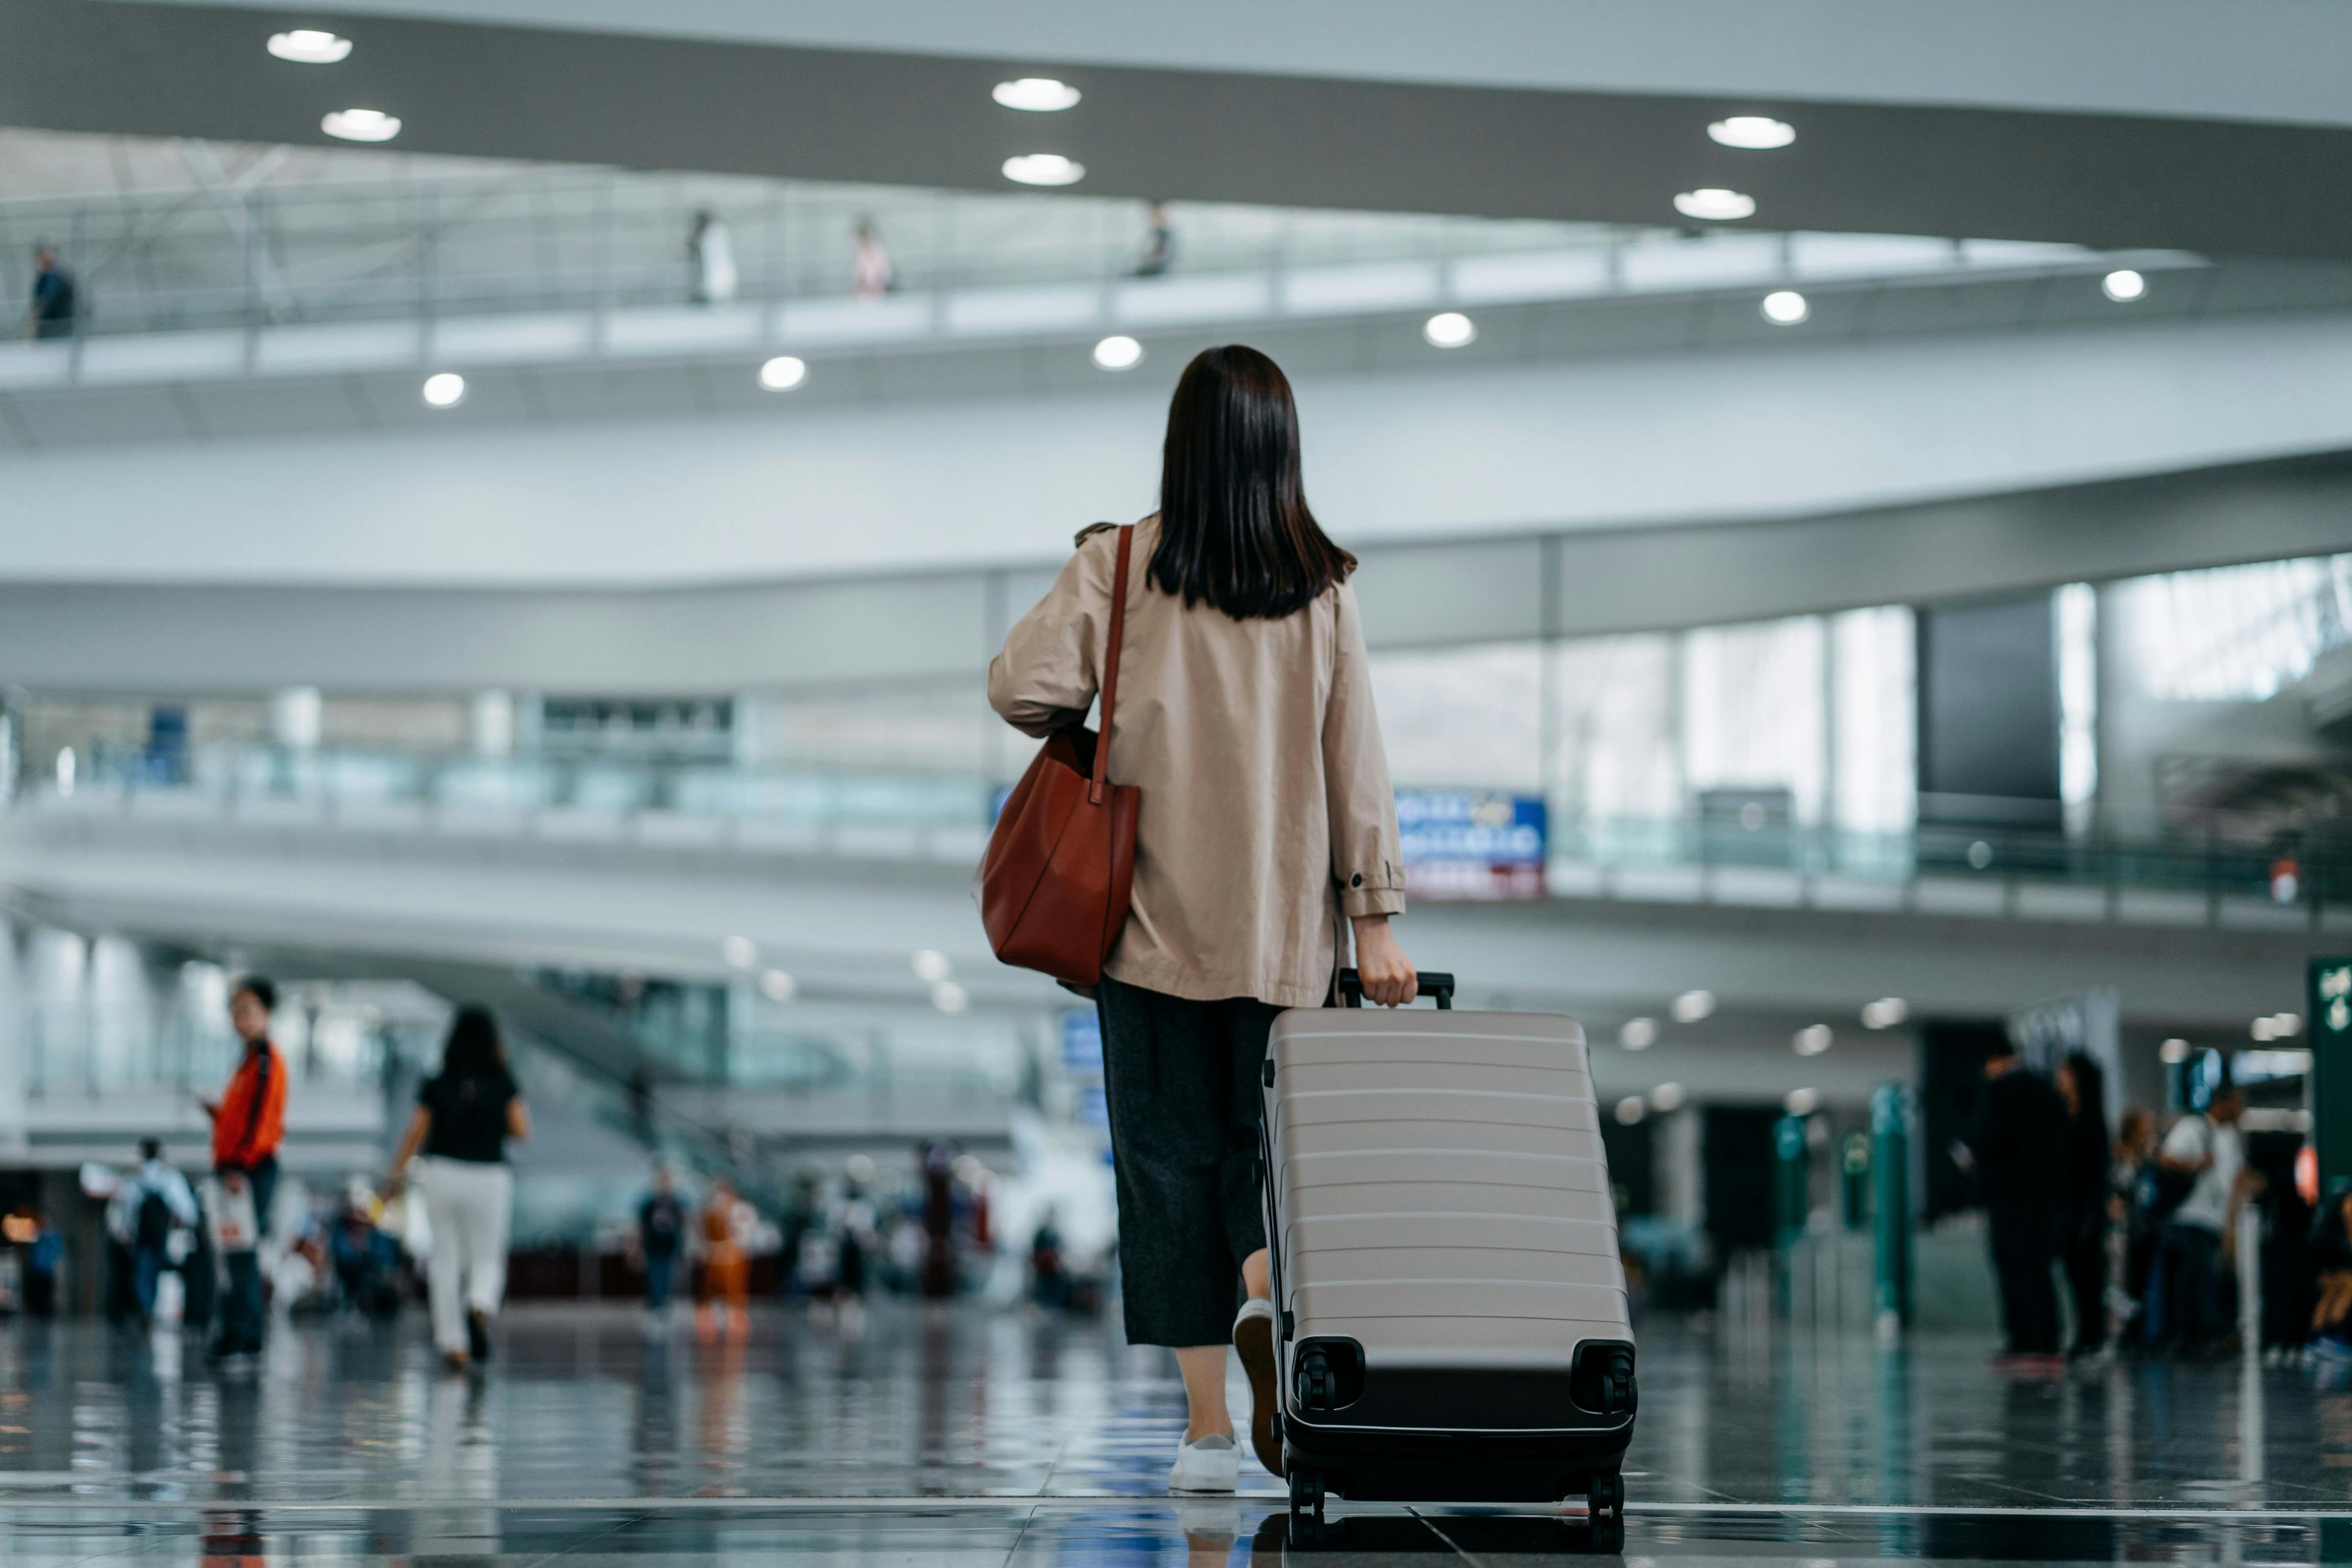 A woman walks away in an airport with luggage trailing behind her.